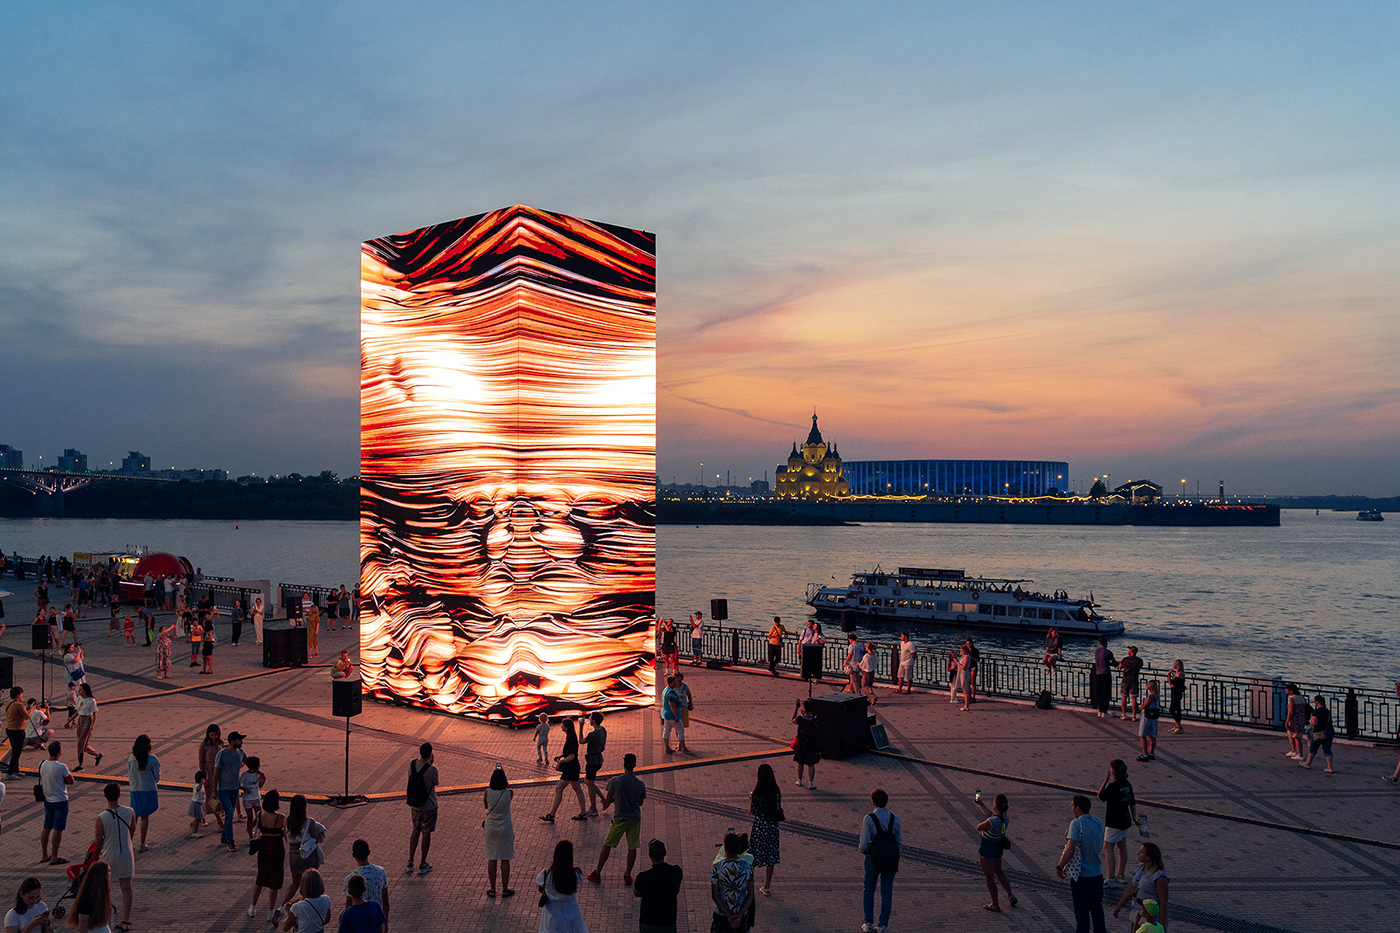 art festival installation interactive Mapping projection